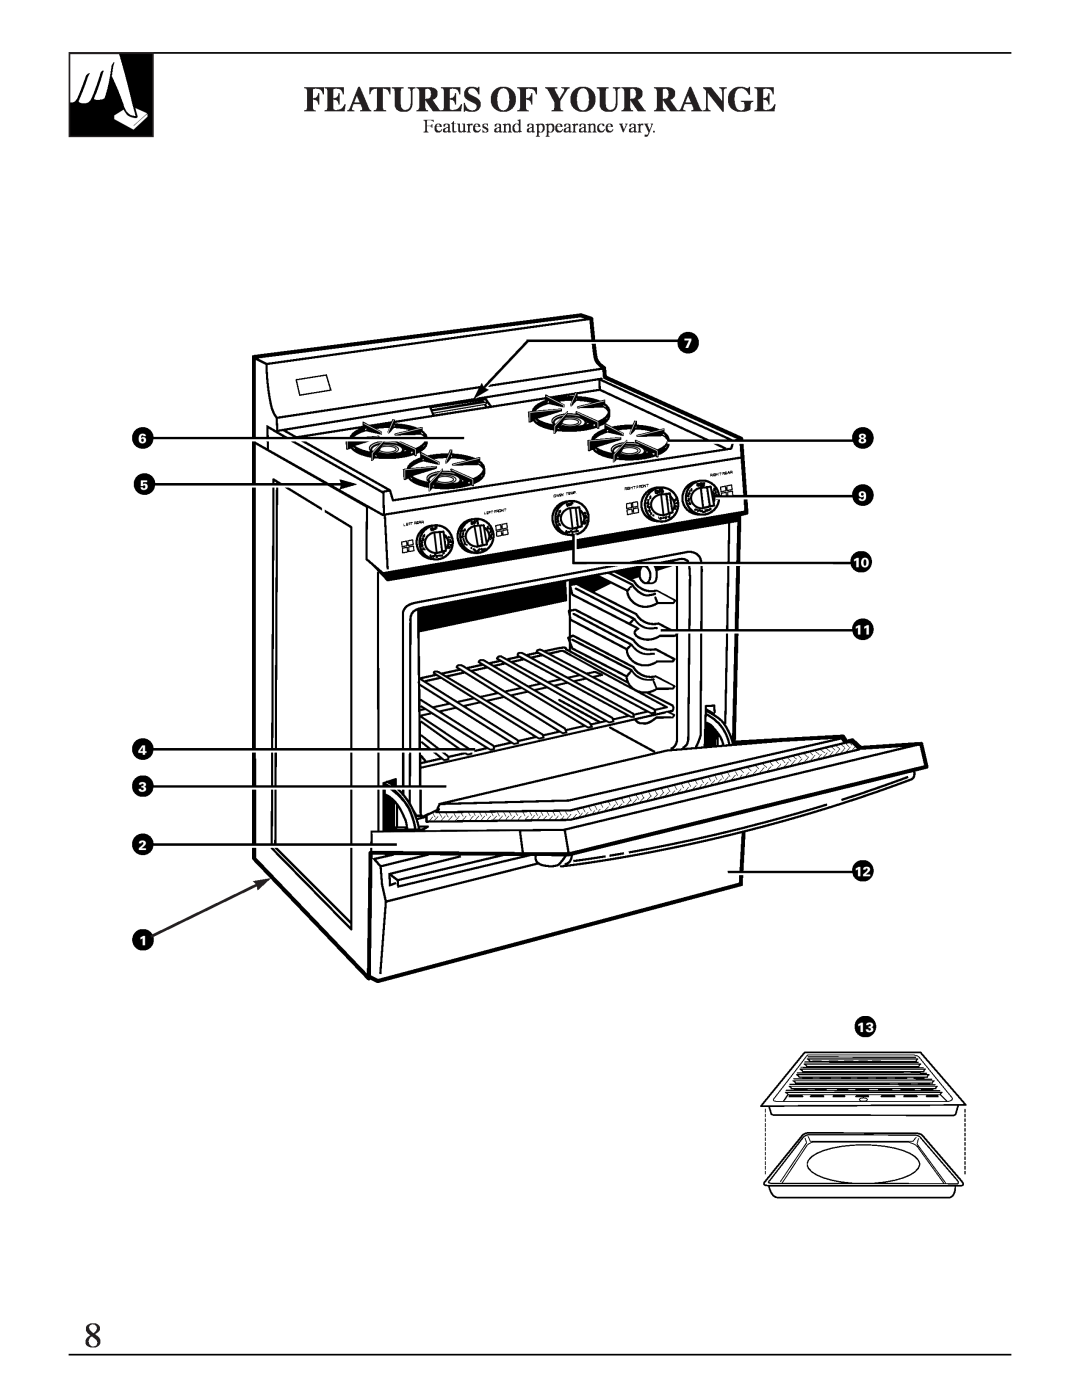 Hotpoint RGB506 installation instructions Features Of Your Range, Oven, Left Front Left Rear, Right, Temp 